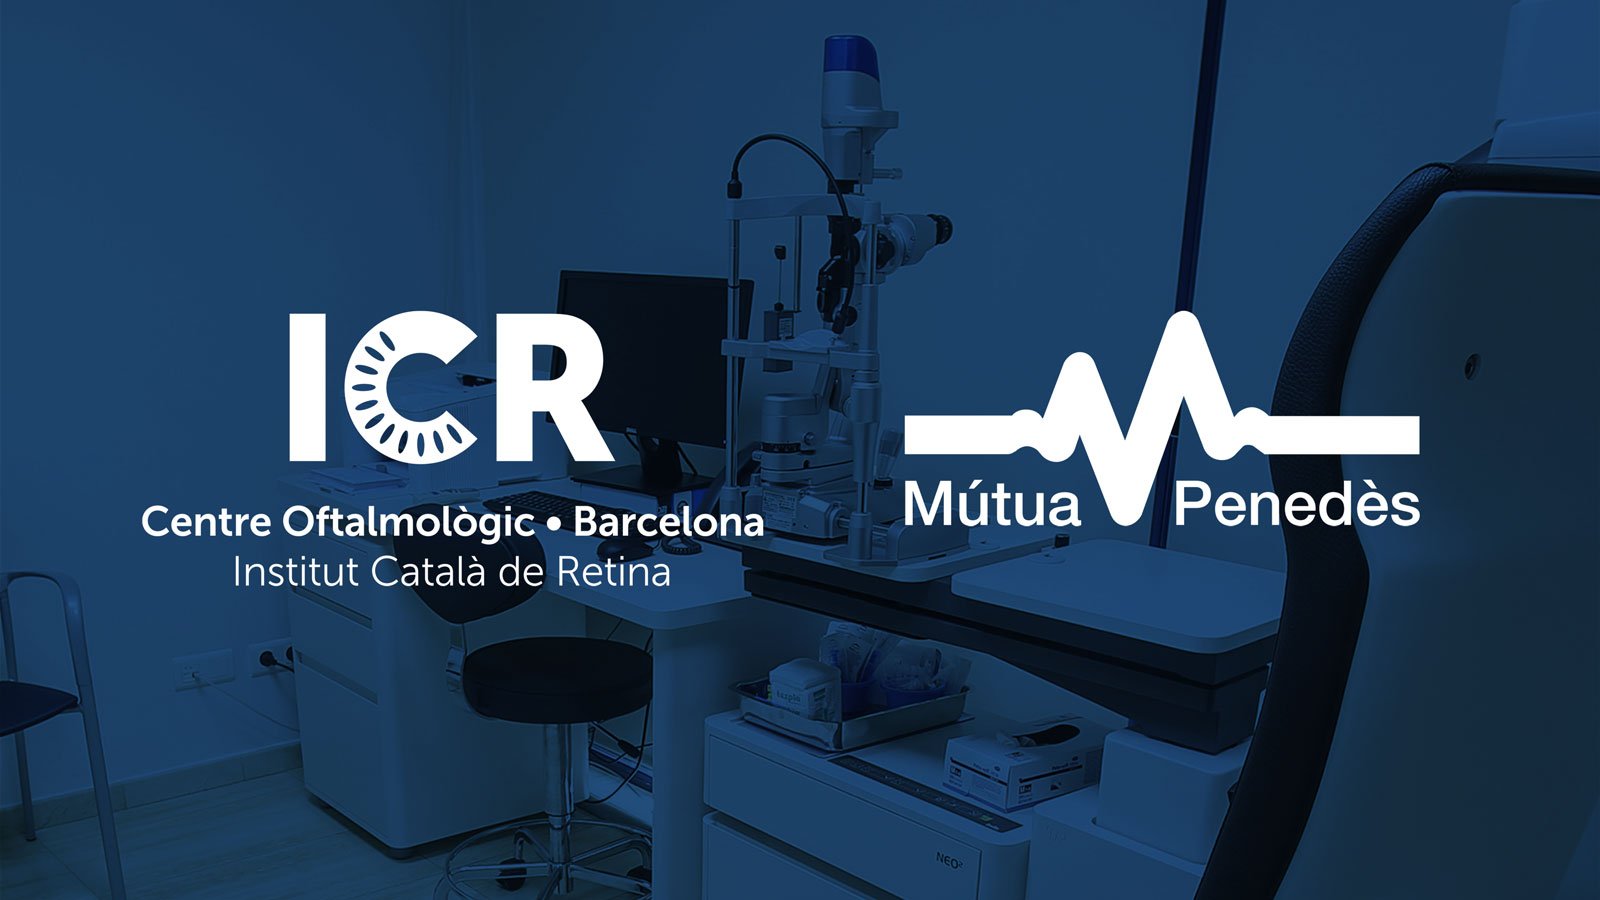 Mútua Penedès inaugurates in Vilafranca a new ophthalmological service by ICR